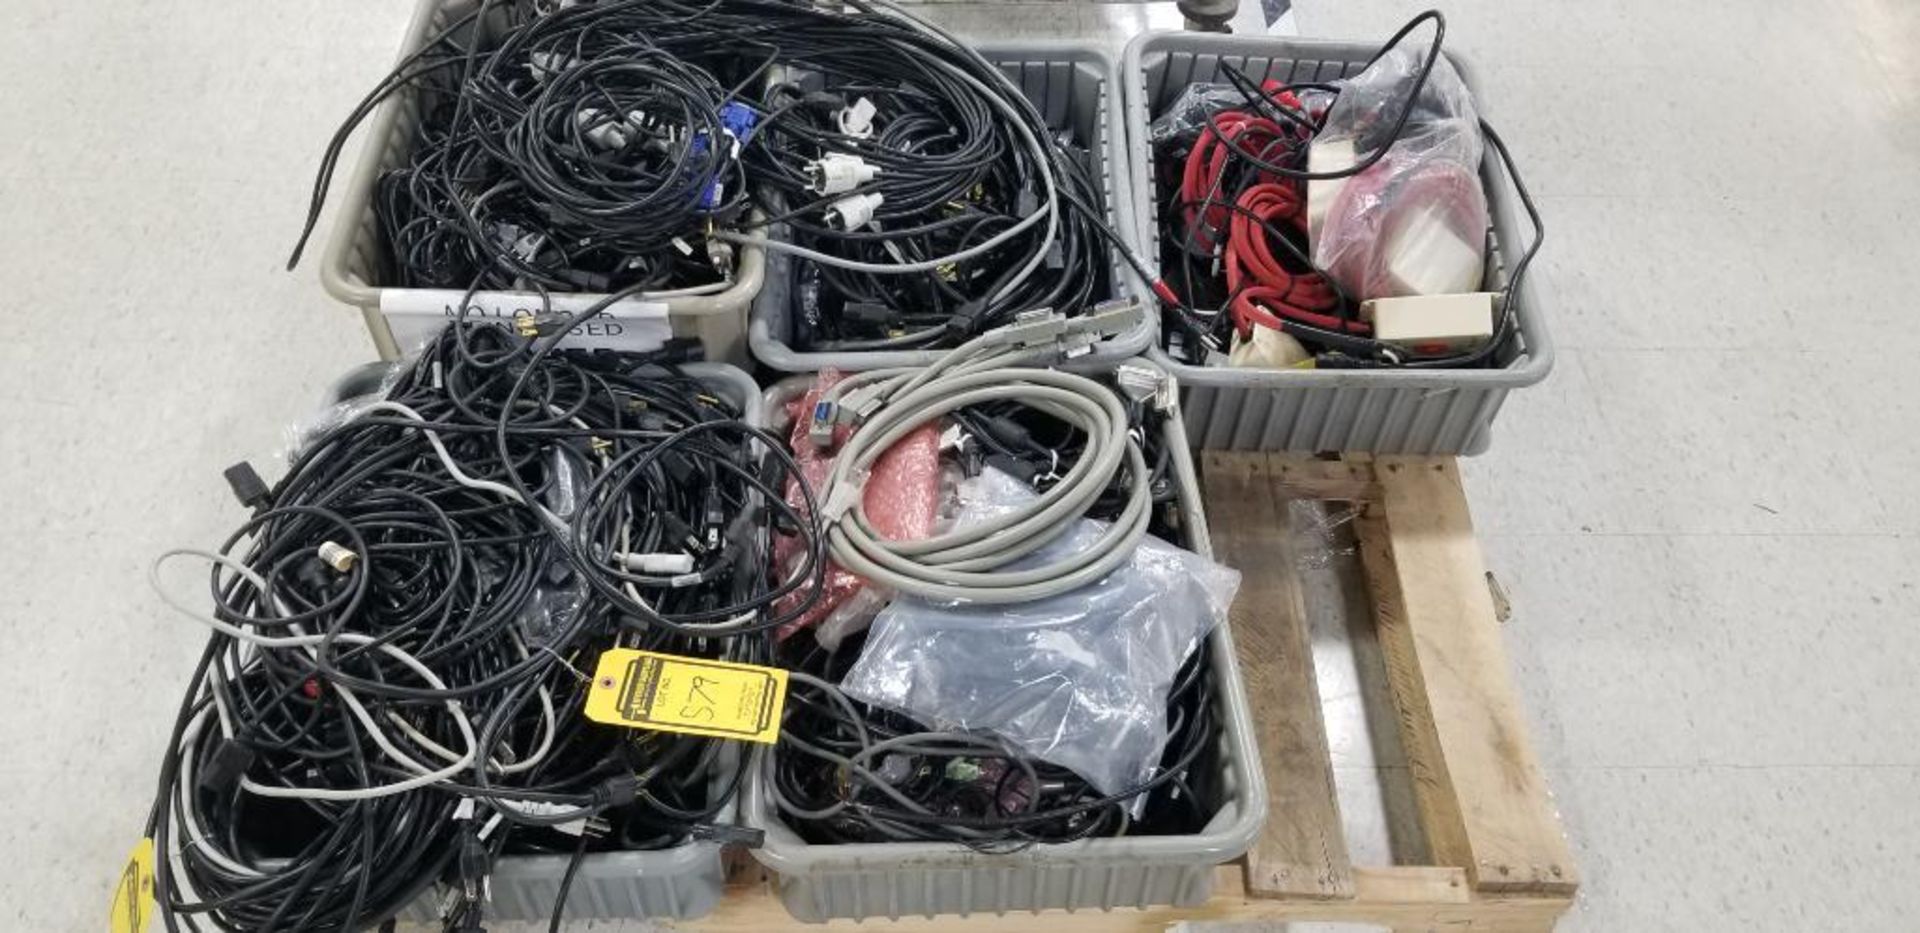 Skid of Assorted Cables